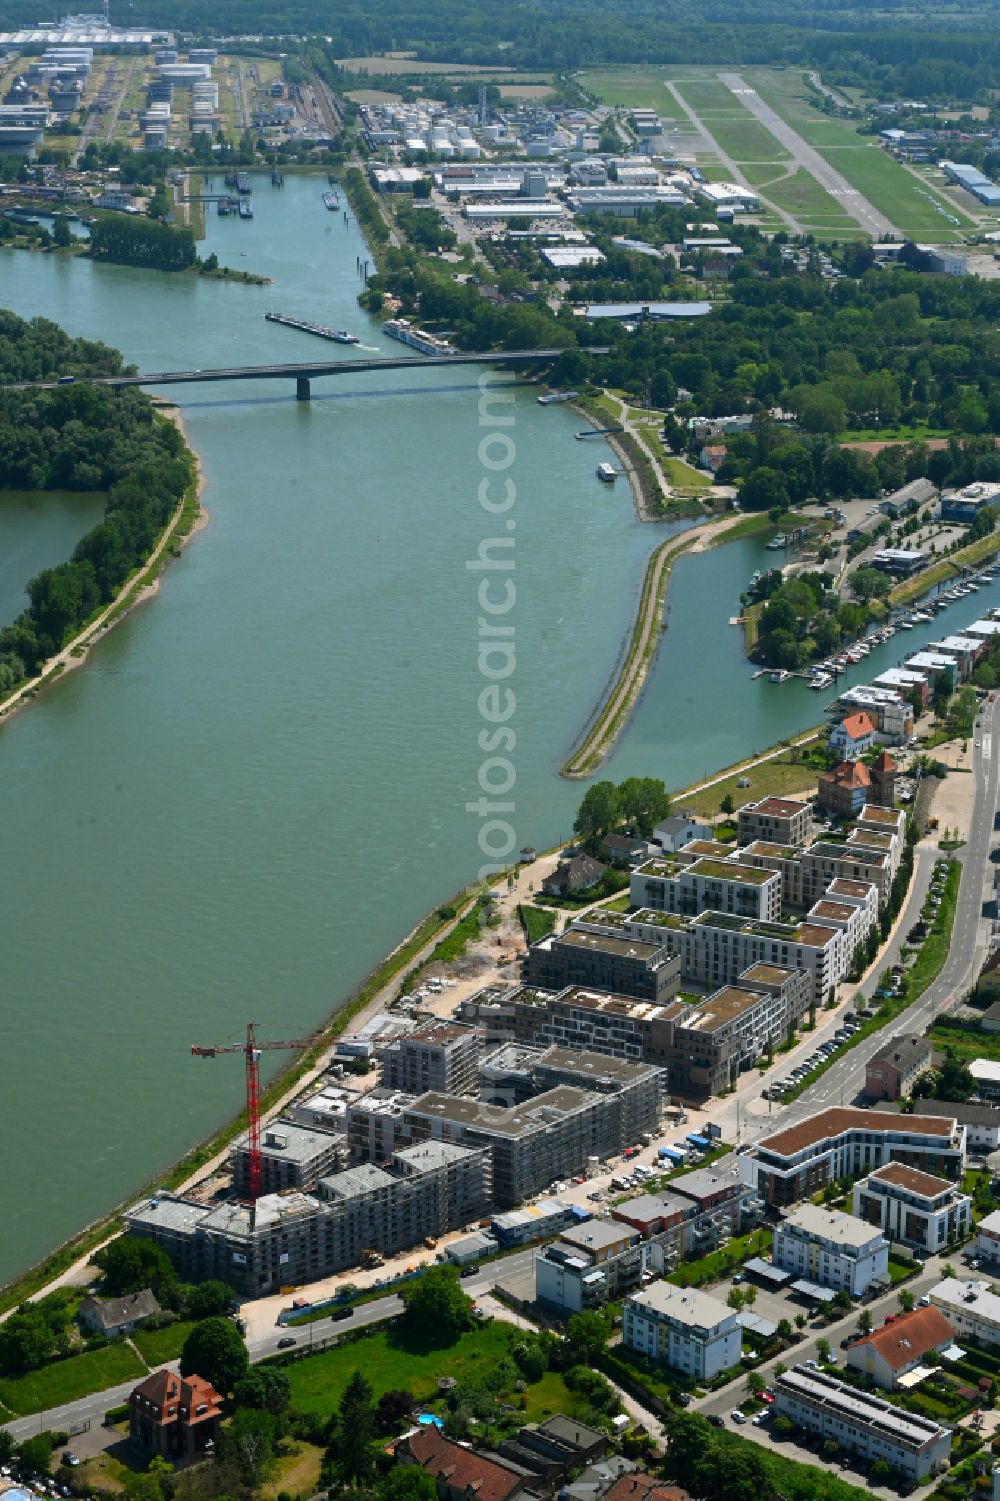 Aerial image Speyer - Construction site to build a new multi-family residential complex Wohnviertel on Fluss on street Alte Ziegelei on rhine river in Speyer in the state Rhineland-Palatinate, Germany